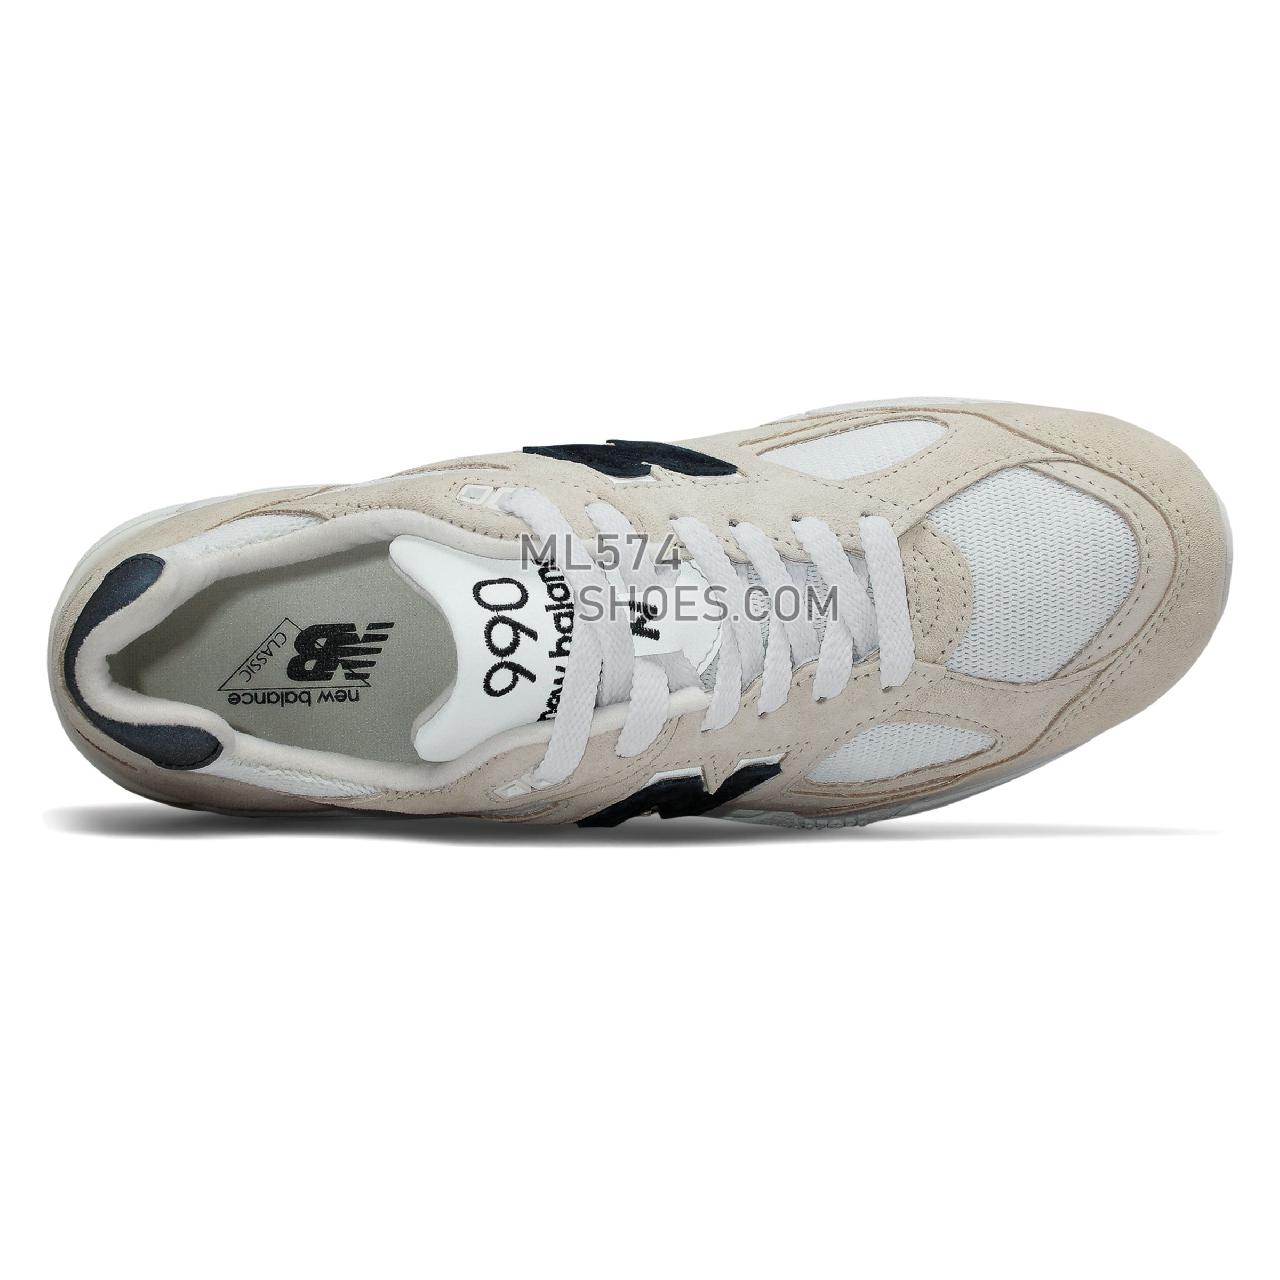 New Balance Mens 990v2 Made in US - Men's 990 - Classic Angora with White and Black - M990WE2